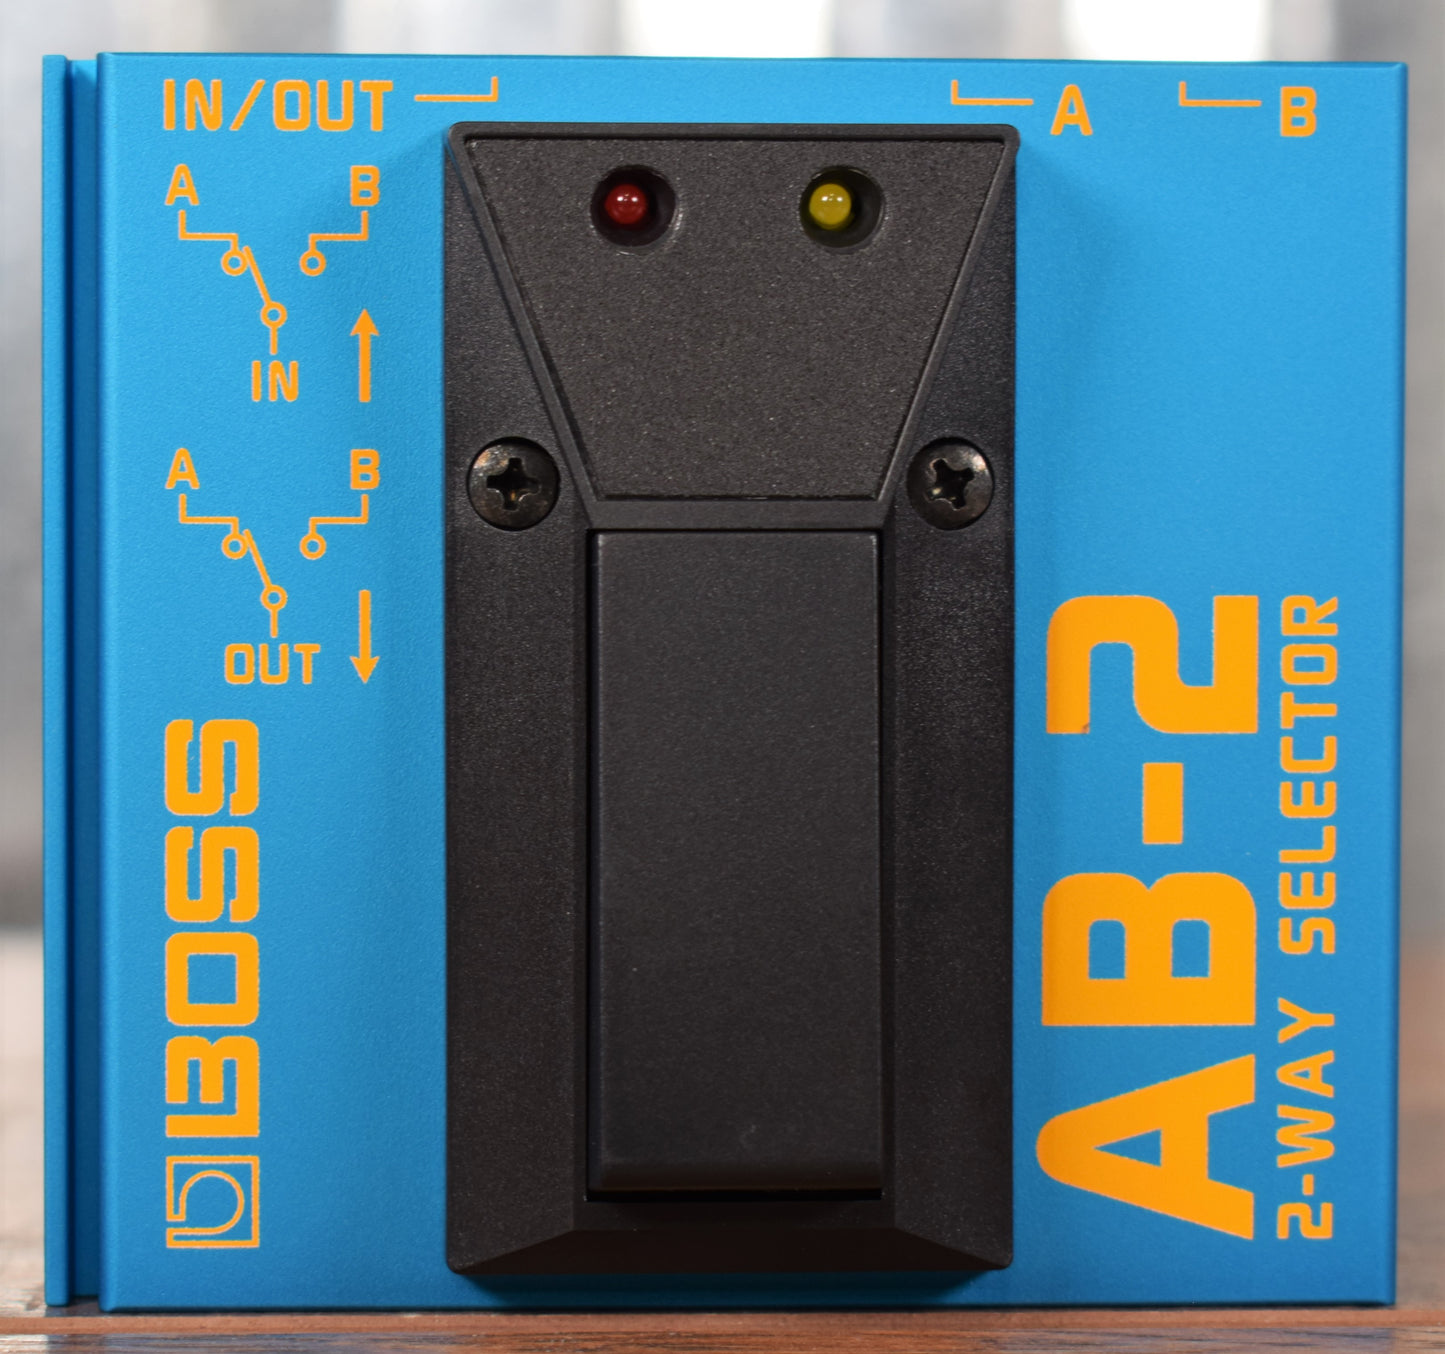 Boss AB-2 A/B Selector Switch Guitar Effect Pedal